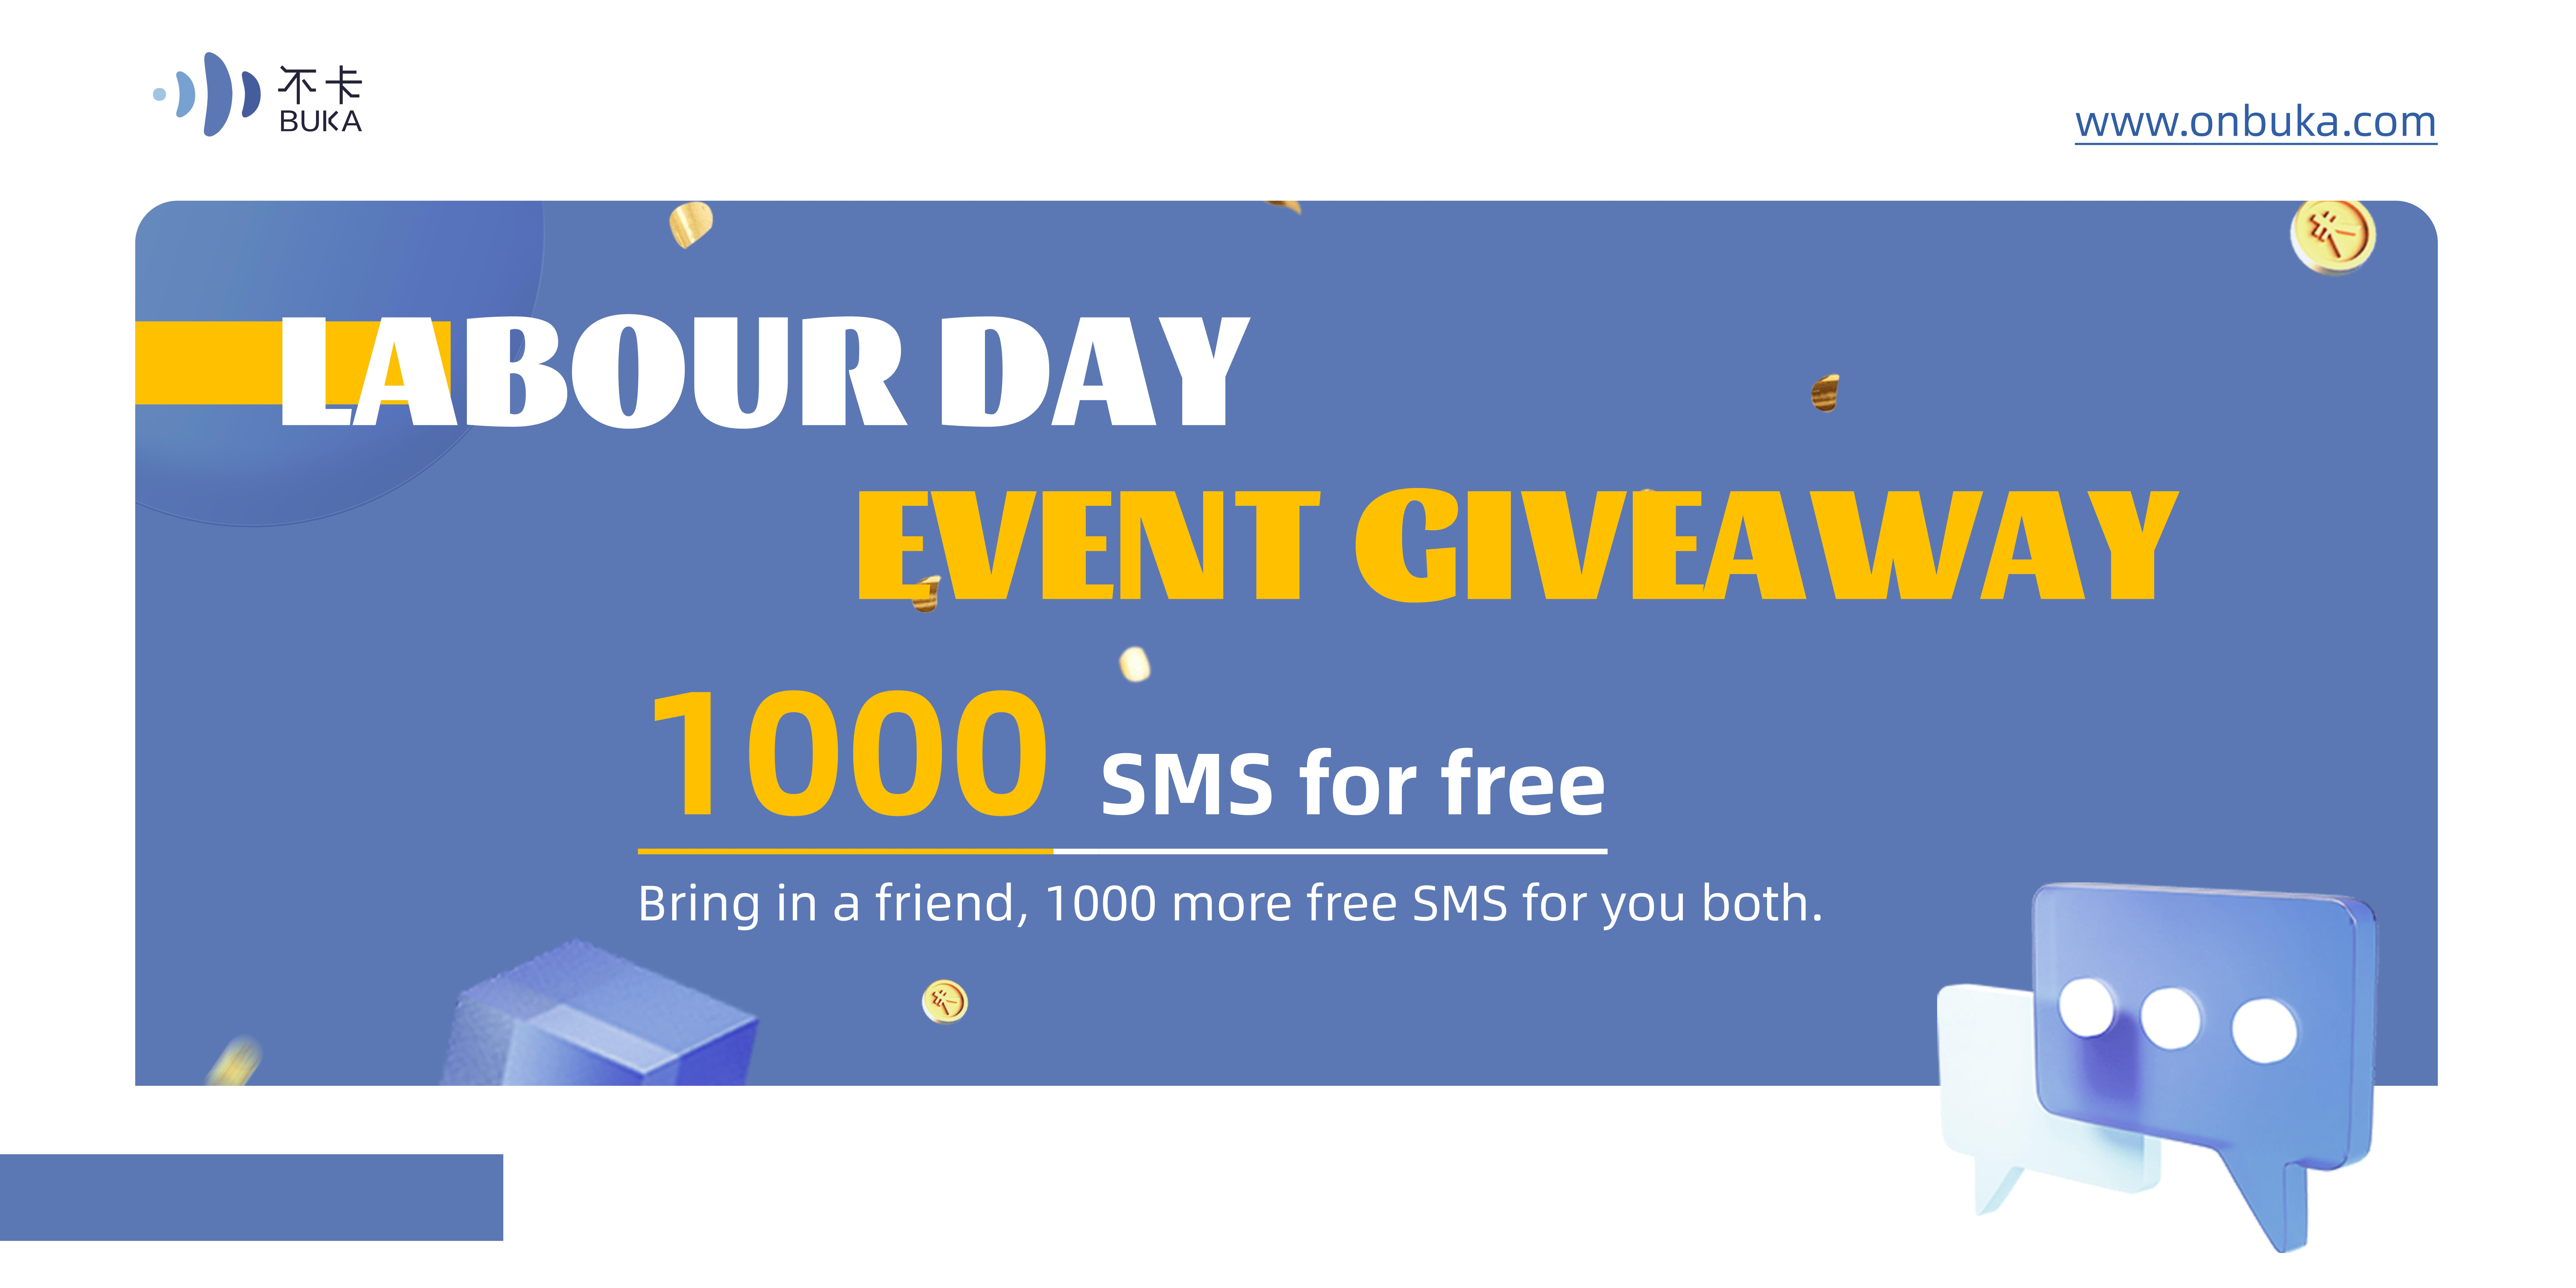 Labour Day Event Giveaway: 1000 SMS for $0